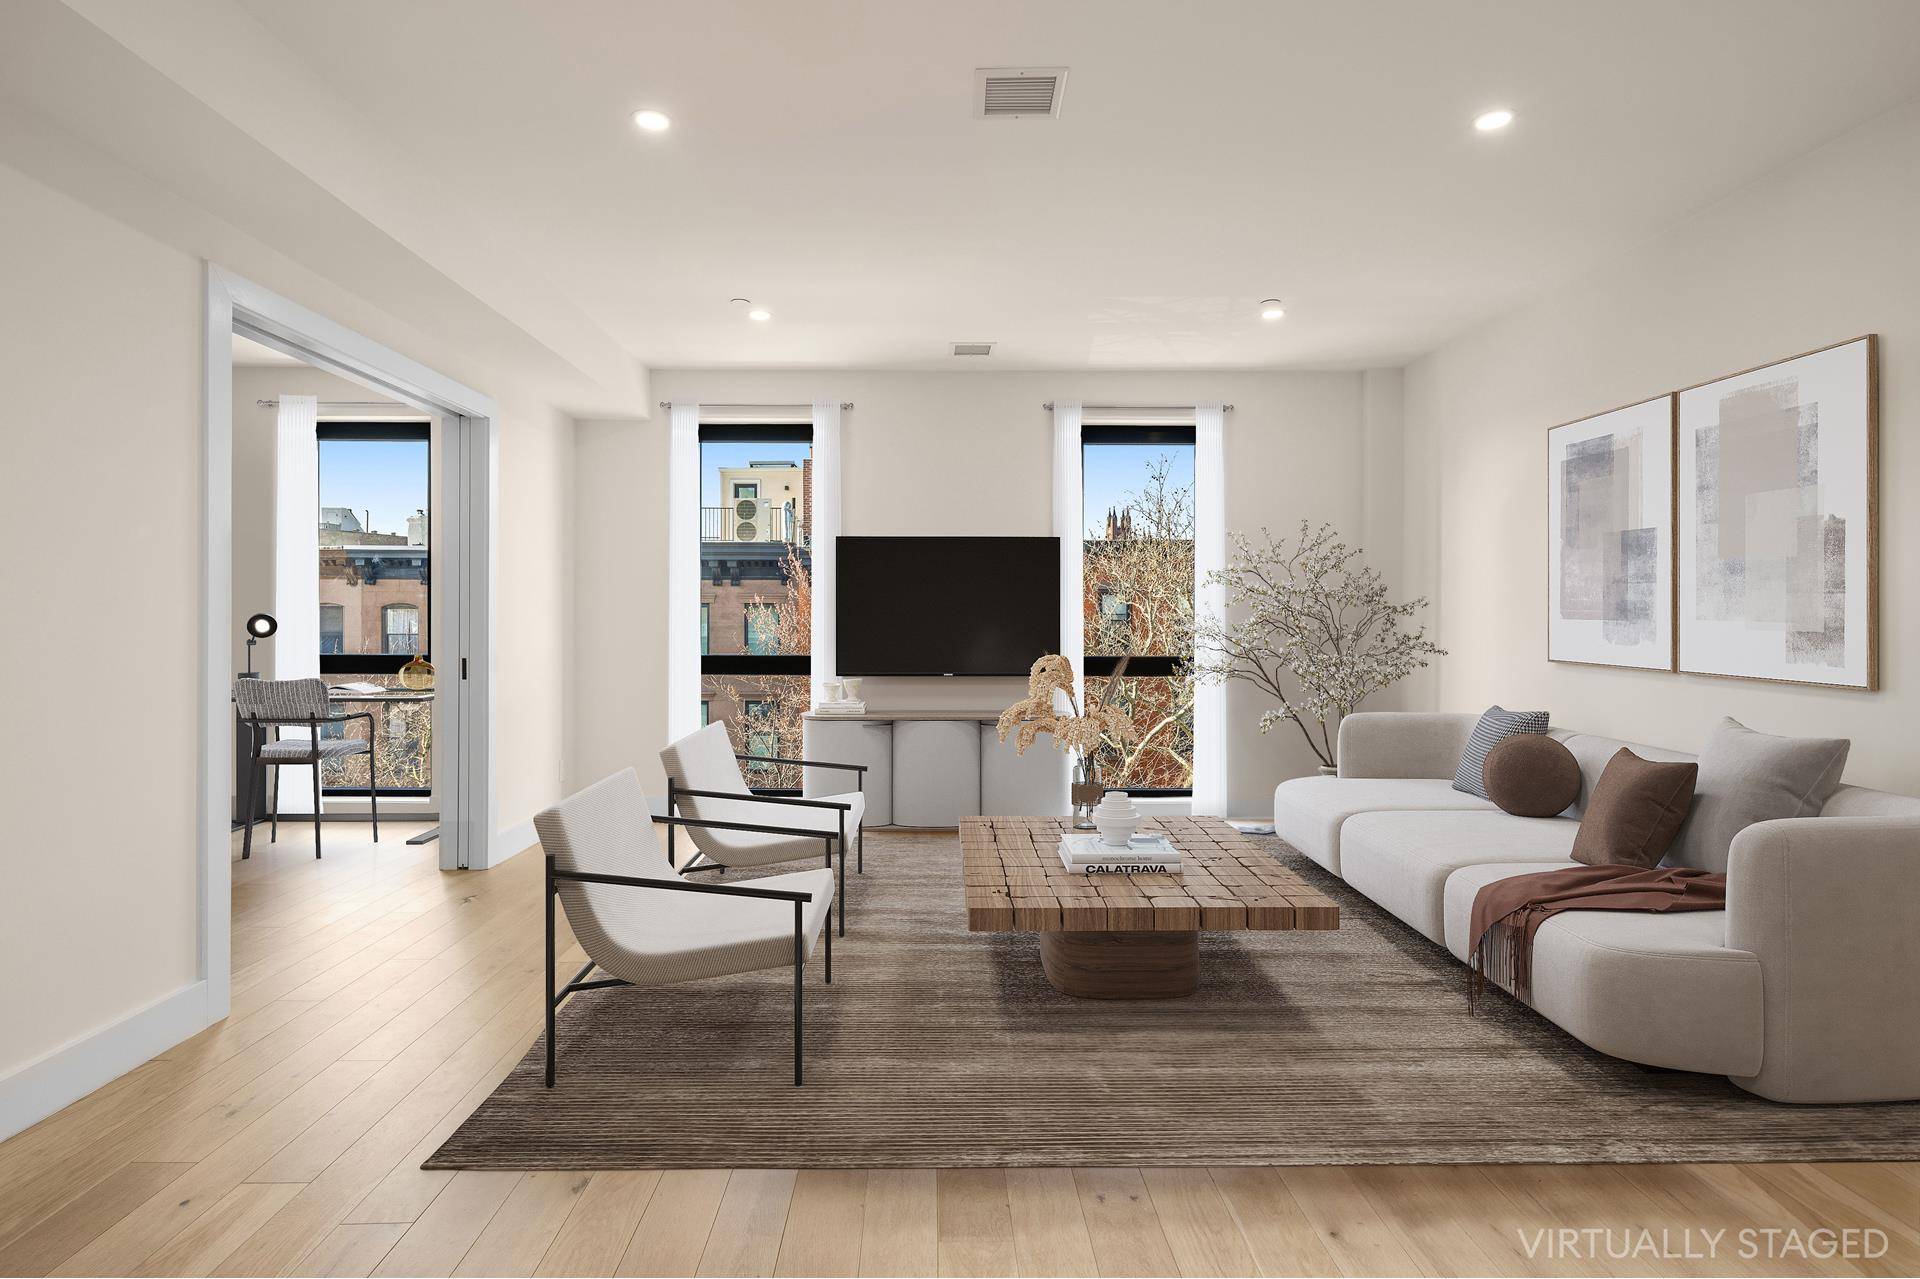 Designer interiors and an enormous private roof deck await in this radiant three bedroom, two bathroom condo located on one of Cobble Hill's most serene tree lined blocks.